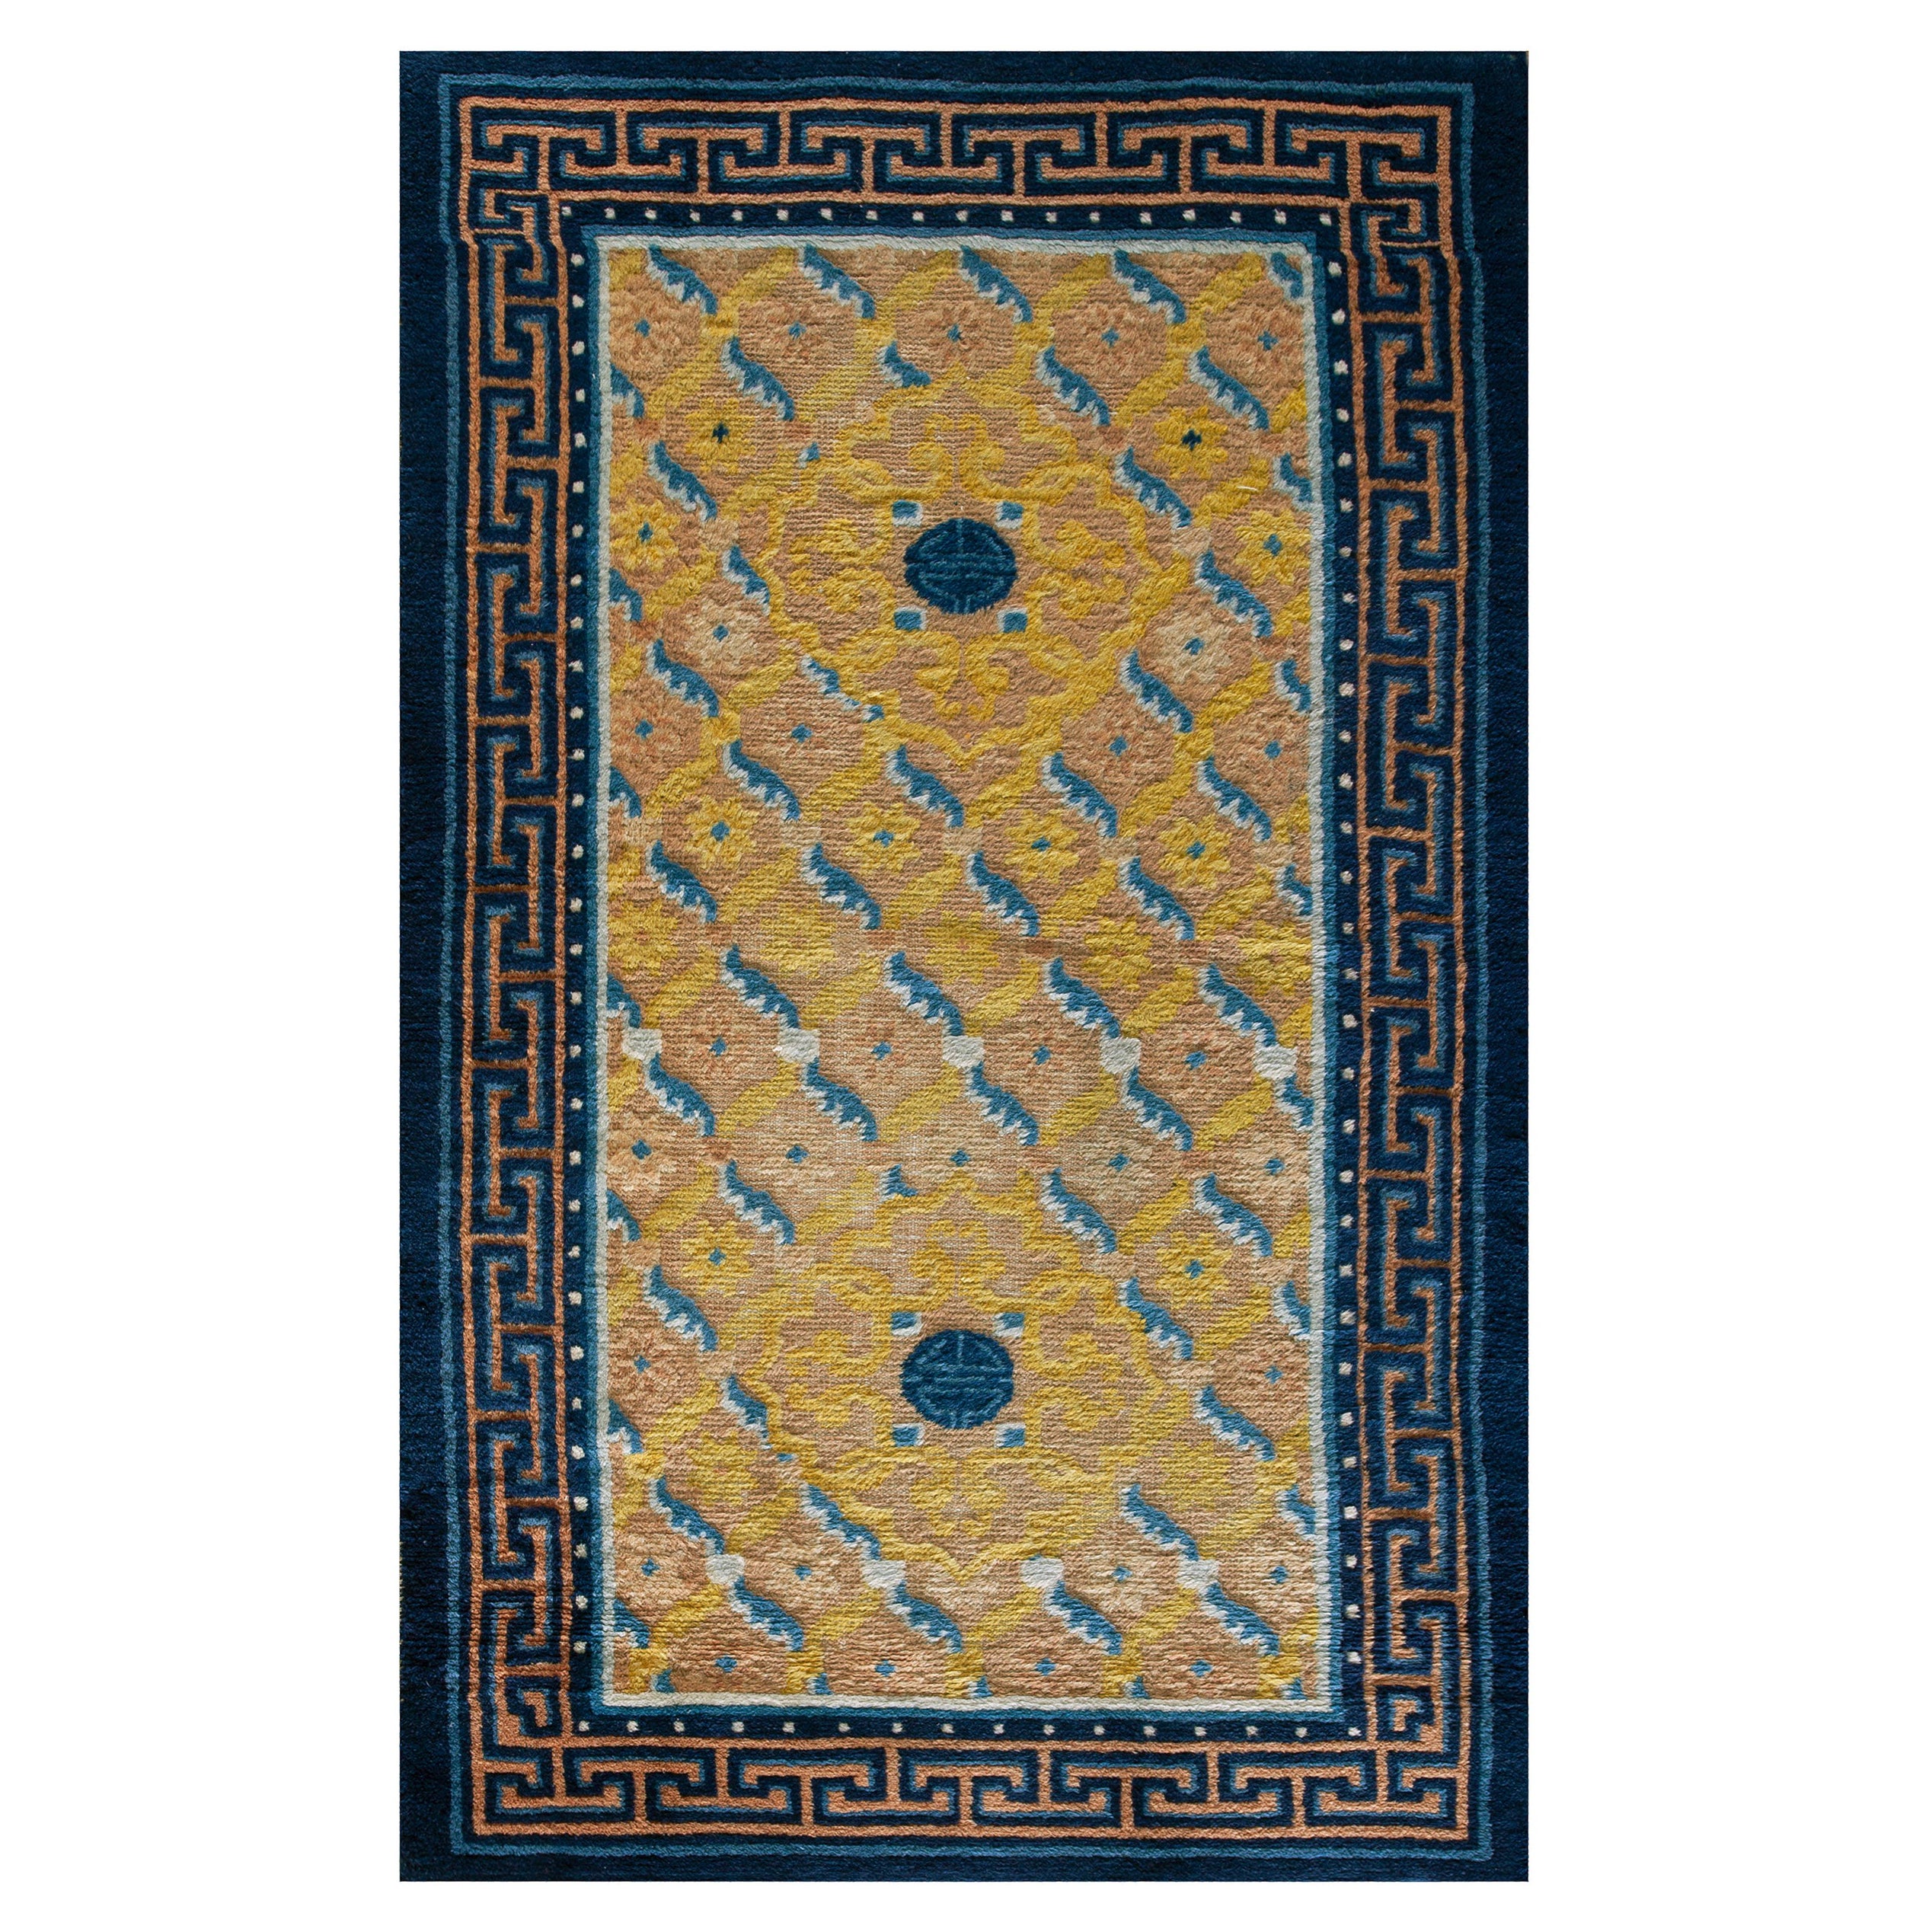 Mid 19th Century Chinese Ningxia Carpet ( 2'9" x 4'8" - 83 x 142 cm ) For Sale